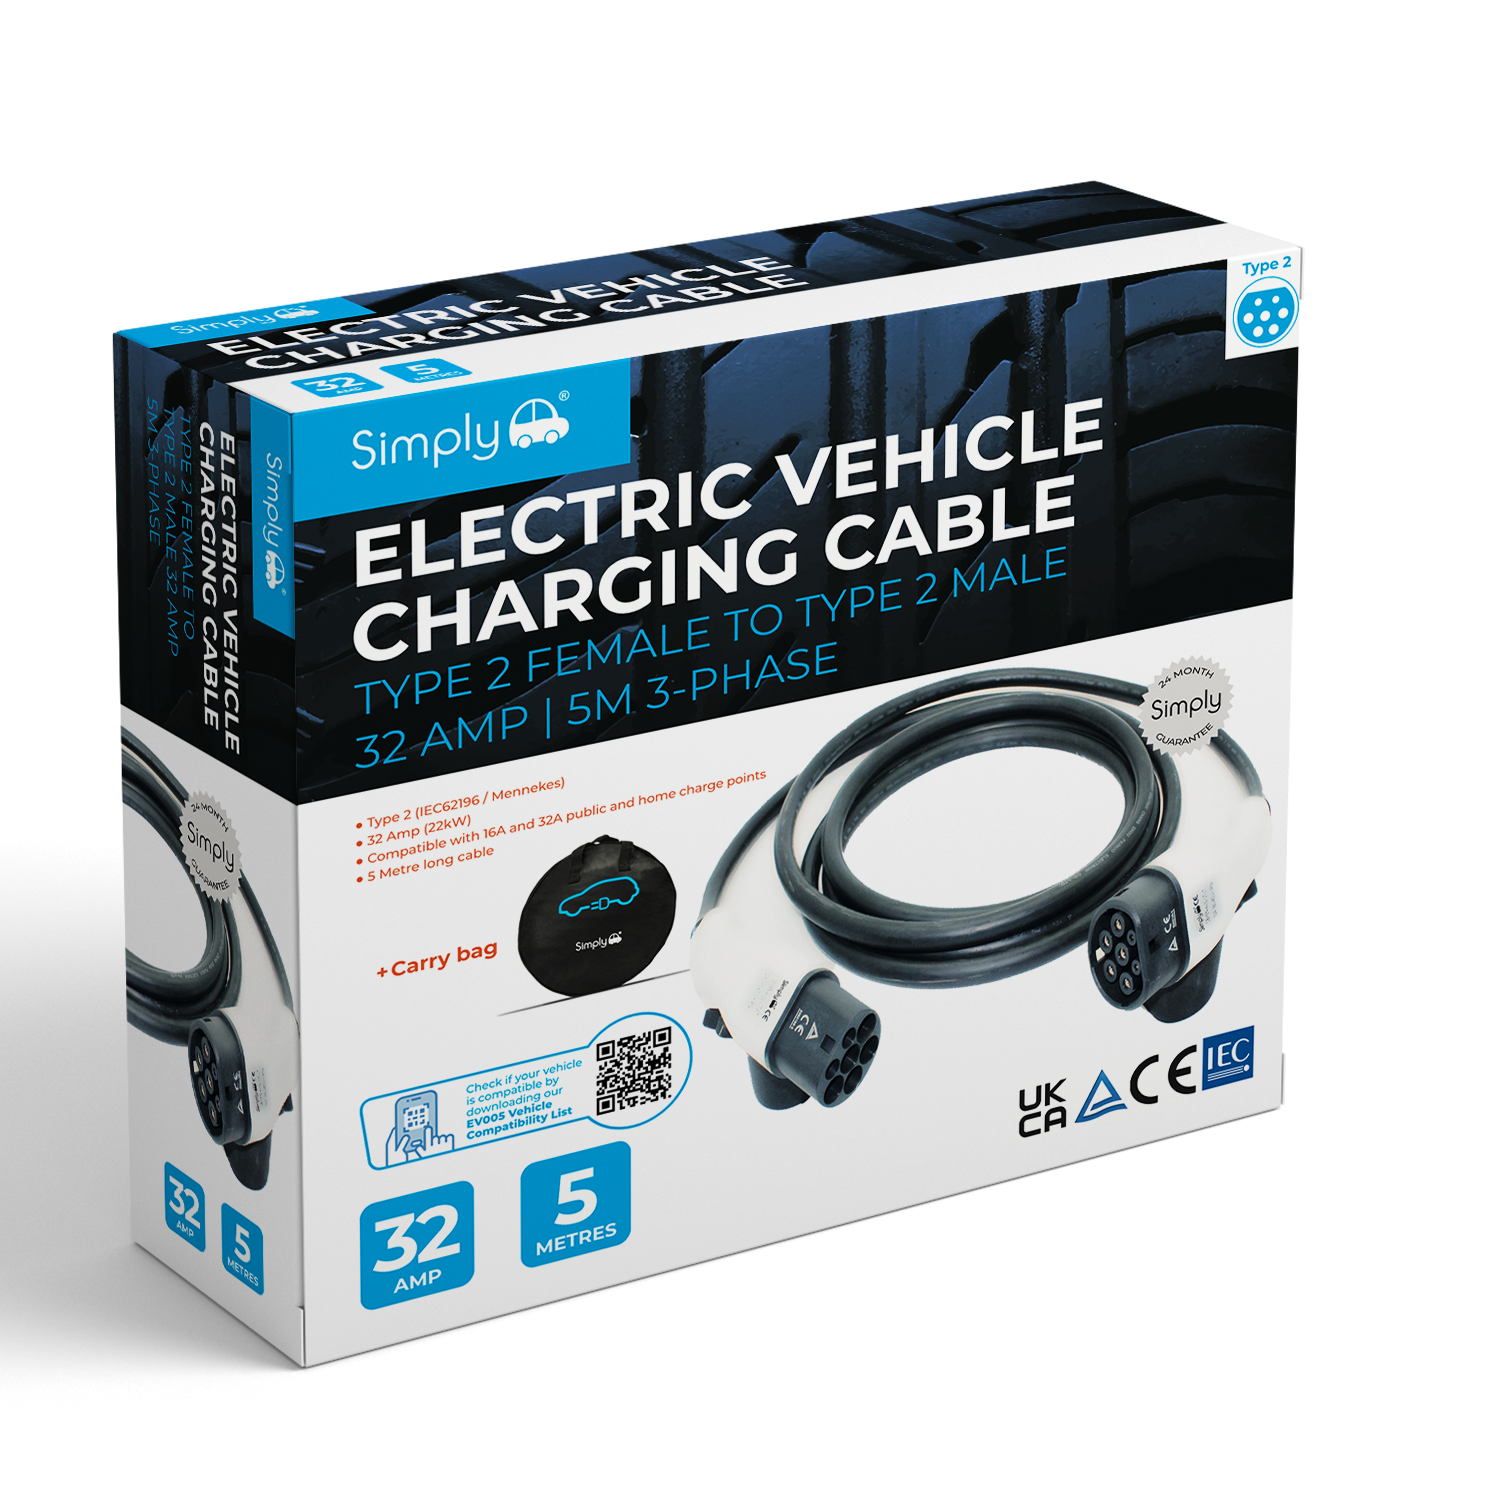 Premium EV charging cable for your electric car with type 2 socket